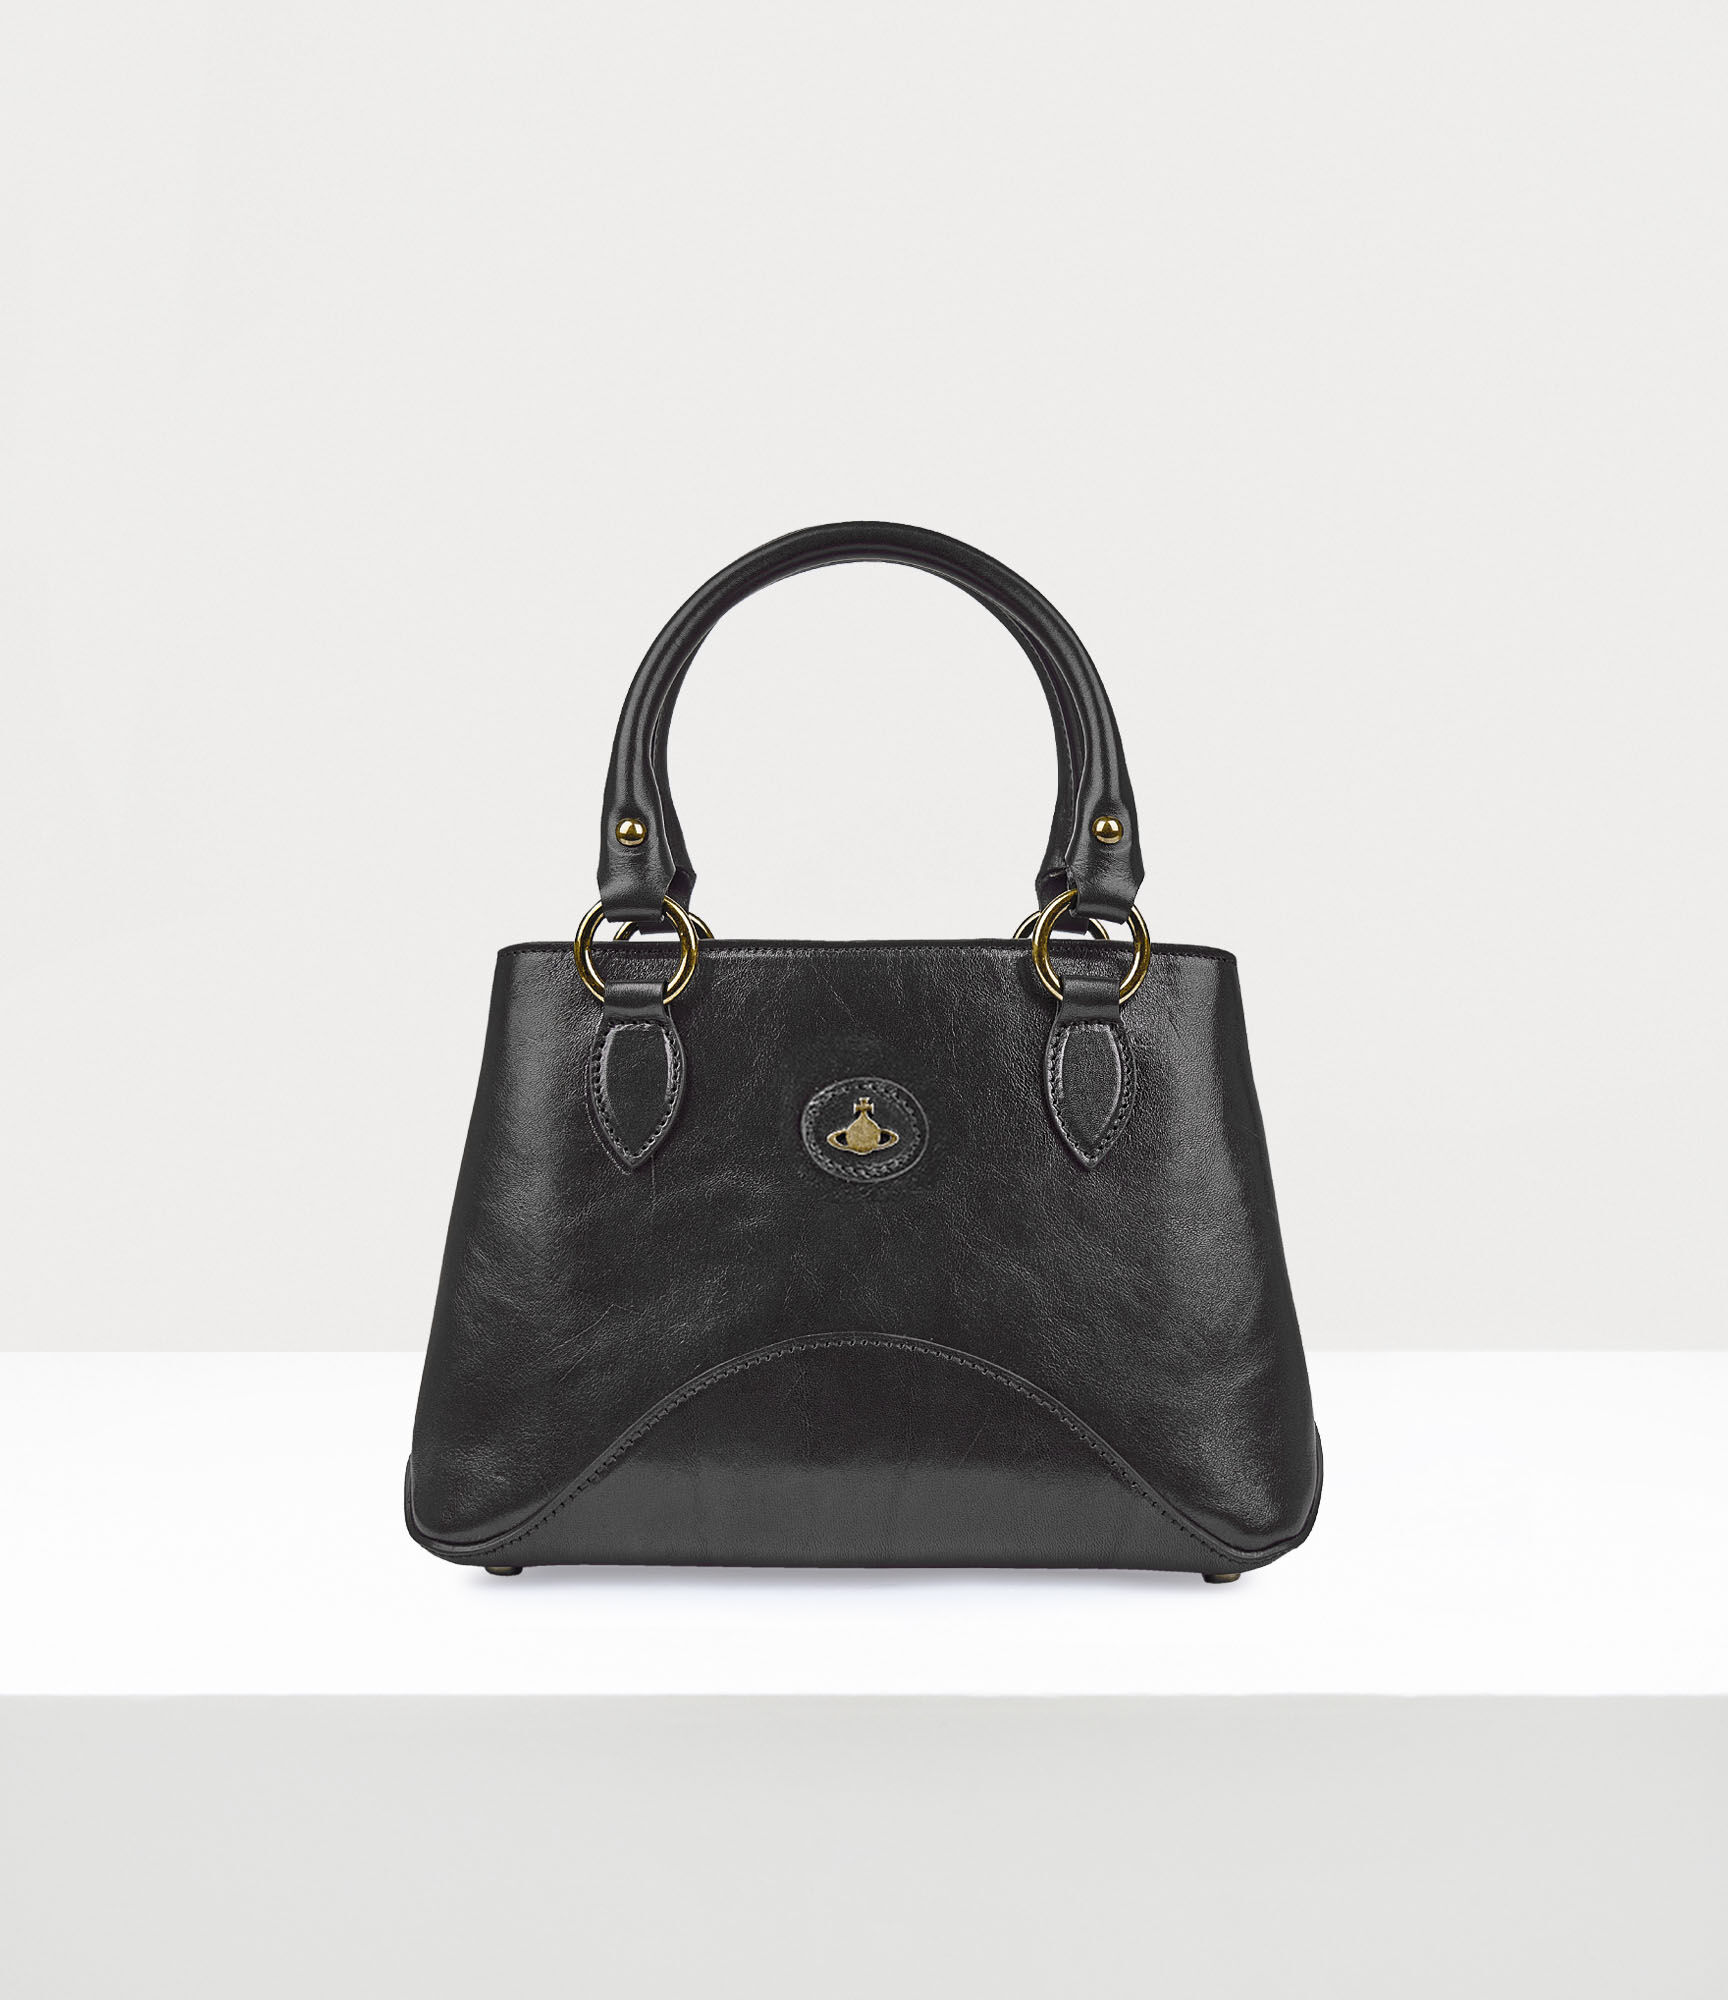 Designer Bags for Women | Large and Small Bags | Vivienne Westwood®